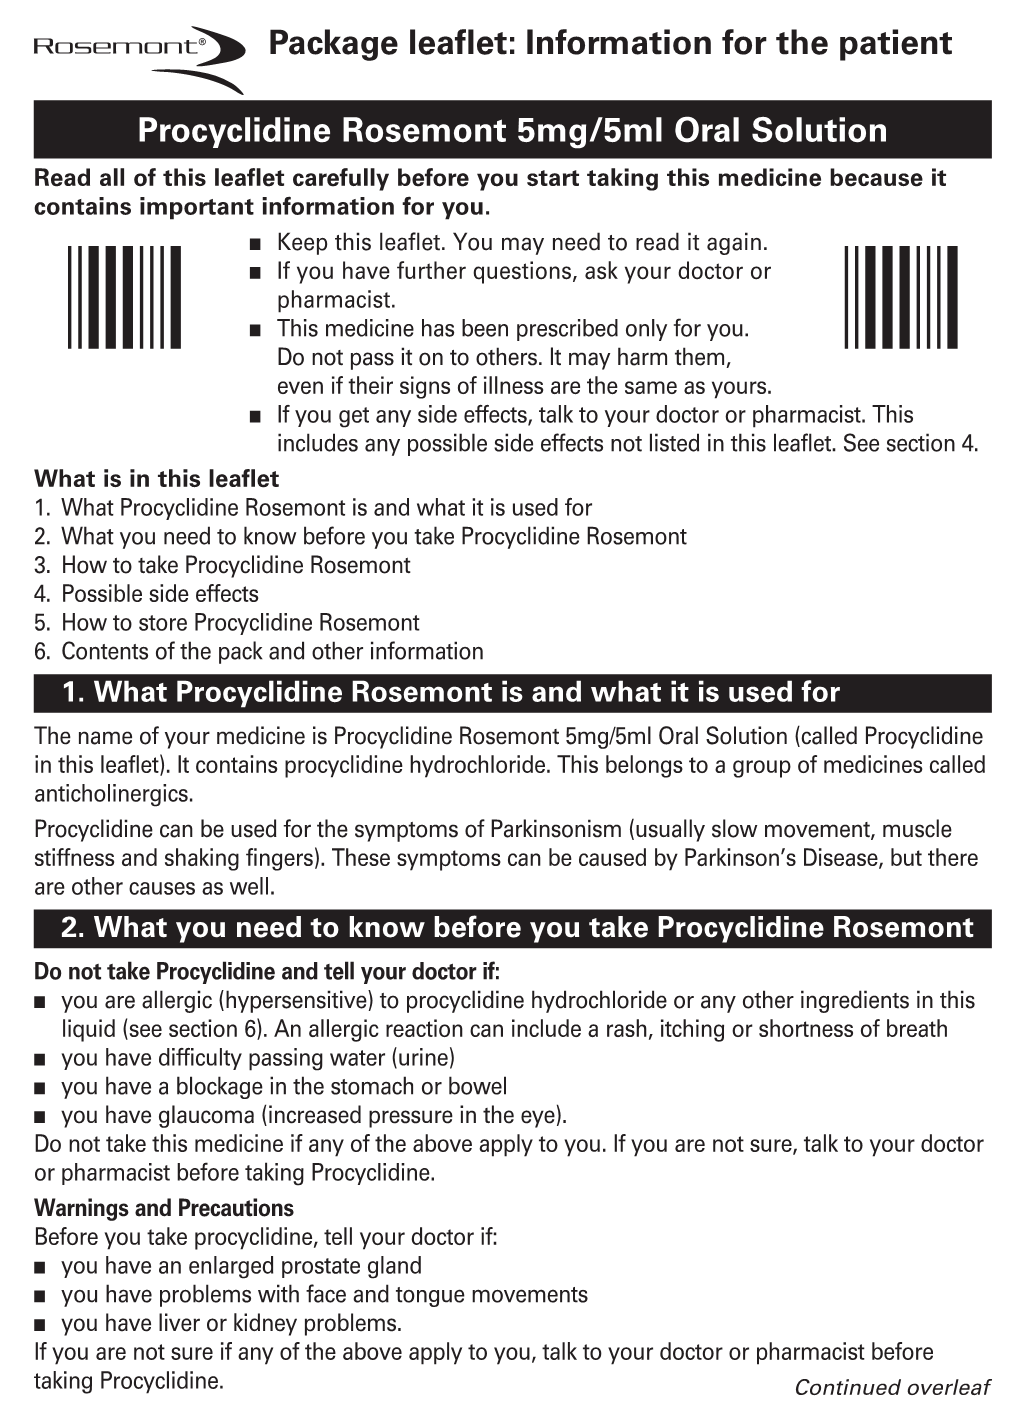 Package Leaflet: Information for the Patient Procyclidine Rosemont 5Mg